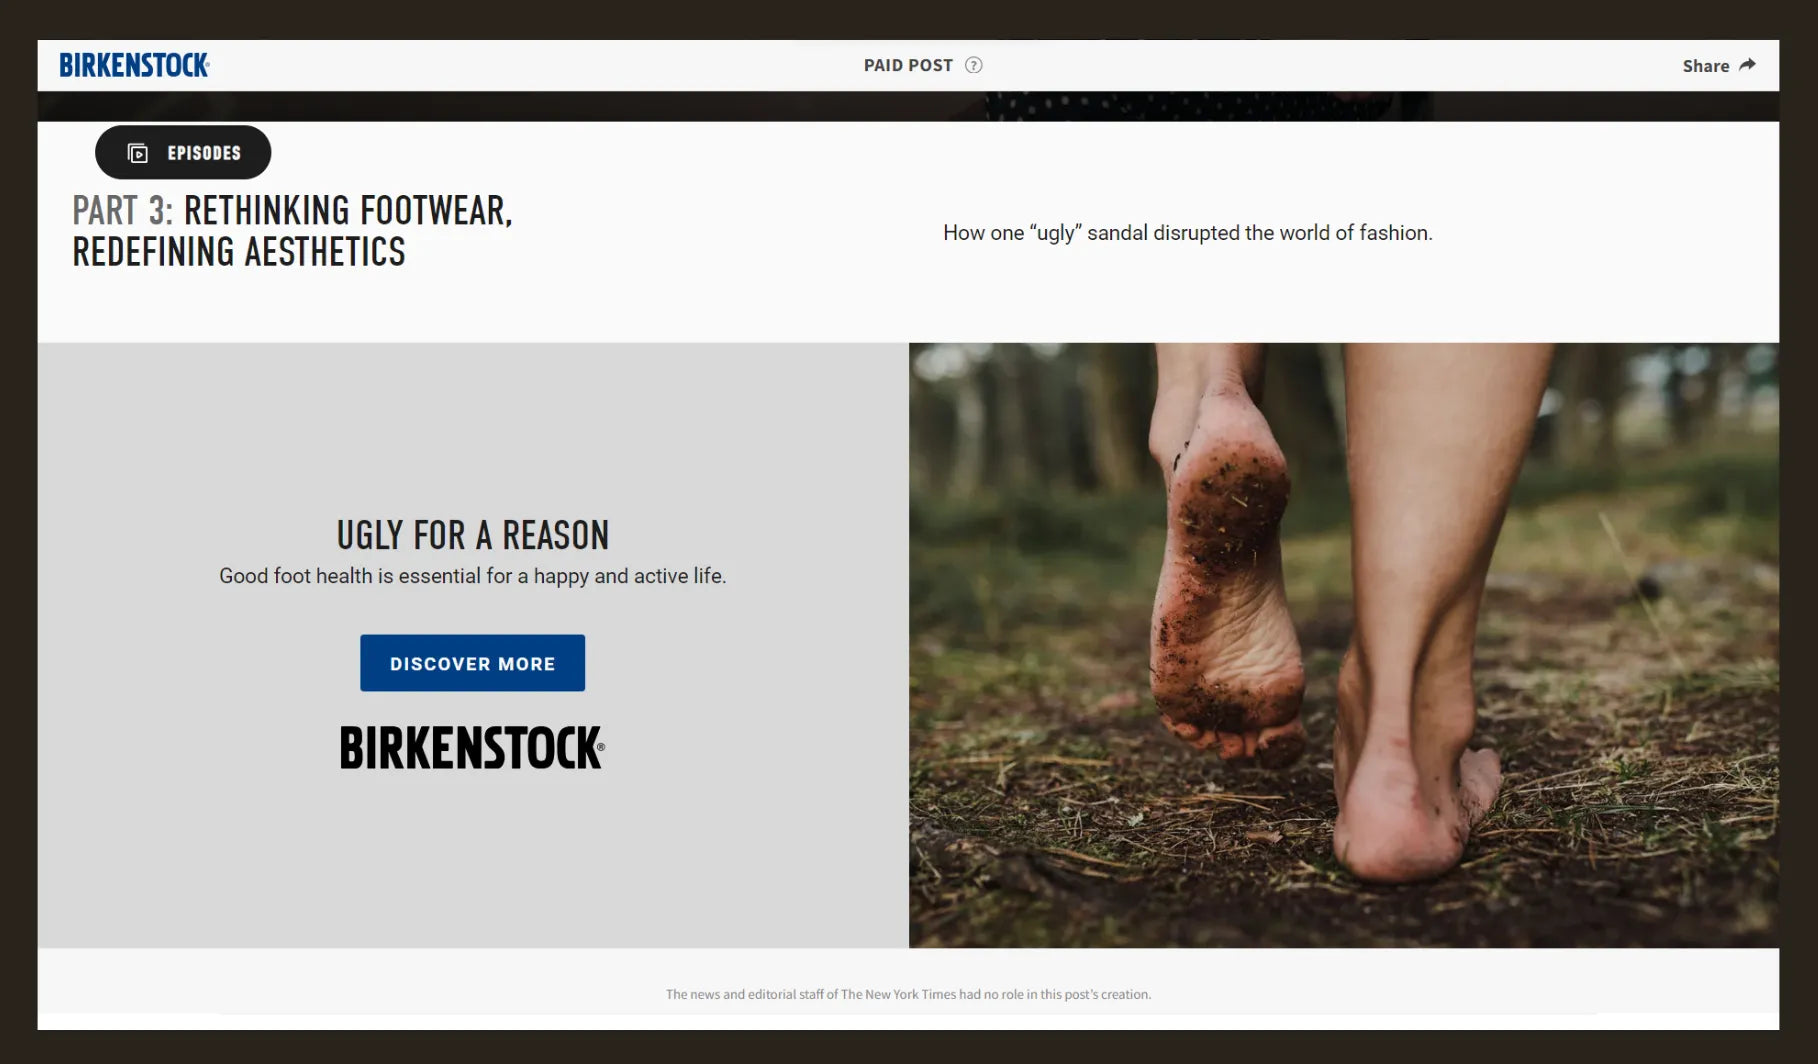 CTA section on Birkenstock’s paid post